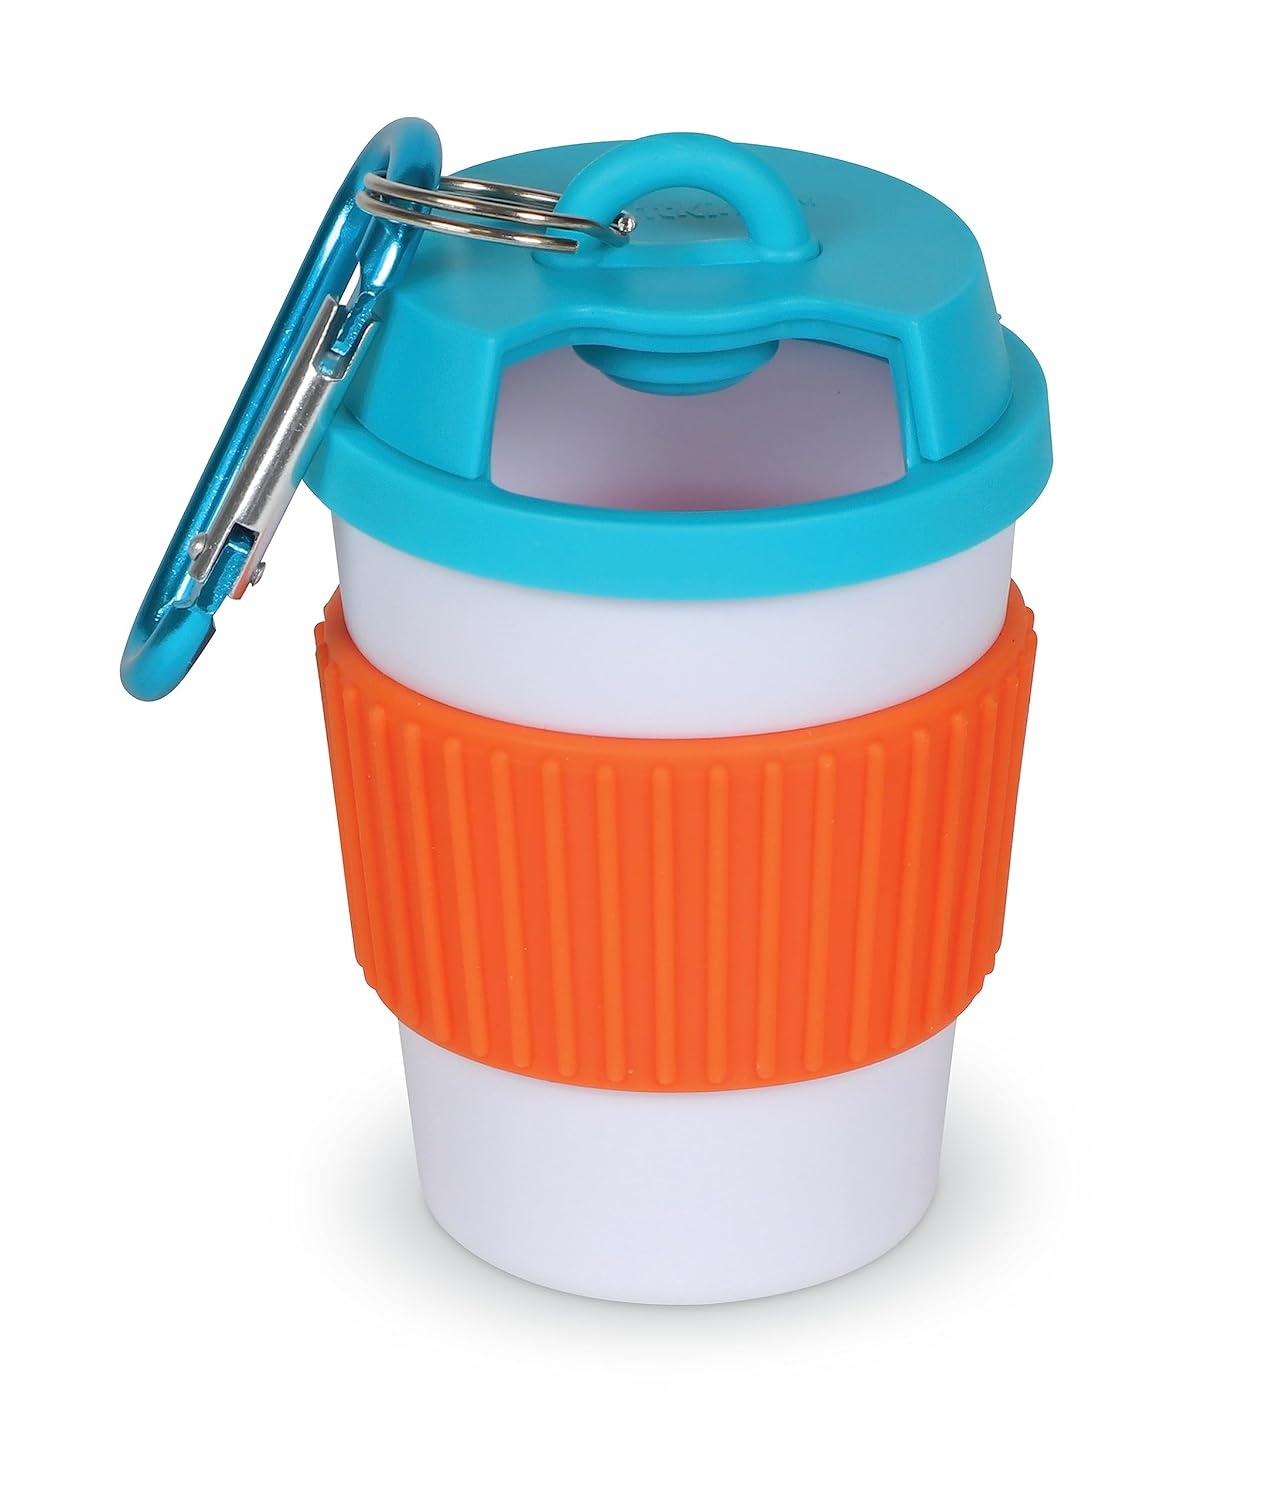 Let's Go Coffee Cup Treat Holders for Dogs